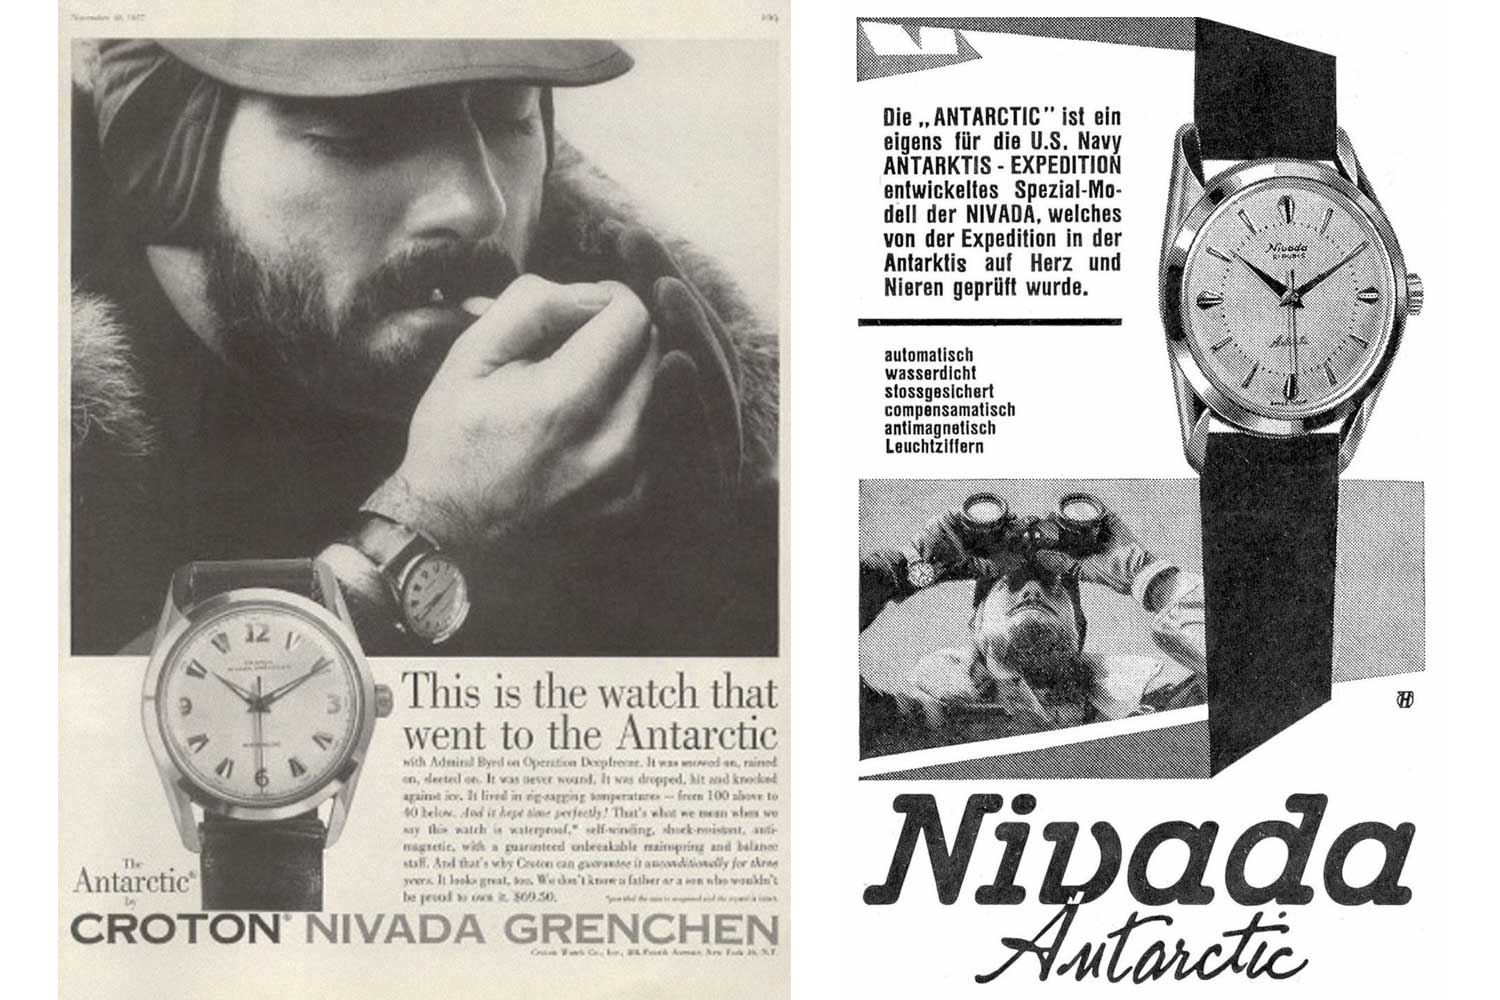 (From left) Vintage Nivada advertisement expounding the virtues of the watch that went to the Antarctic; A vintage Nivada Antarctic advertisement from 1962